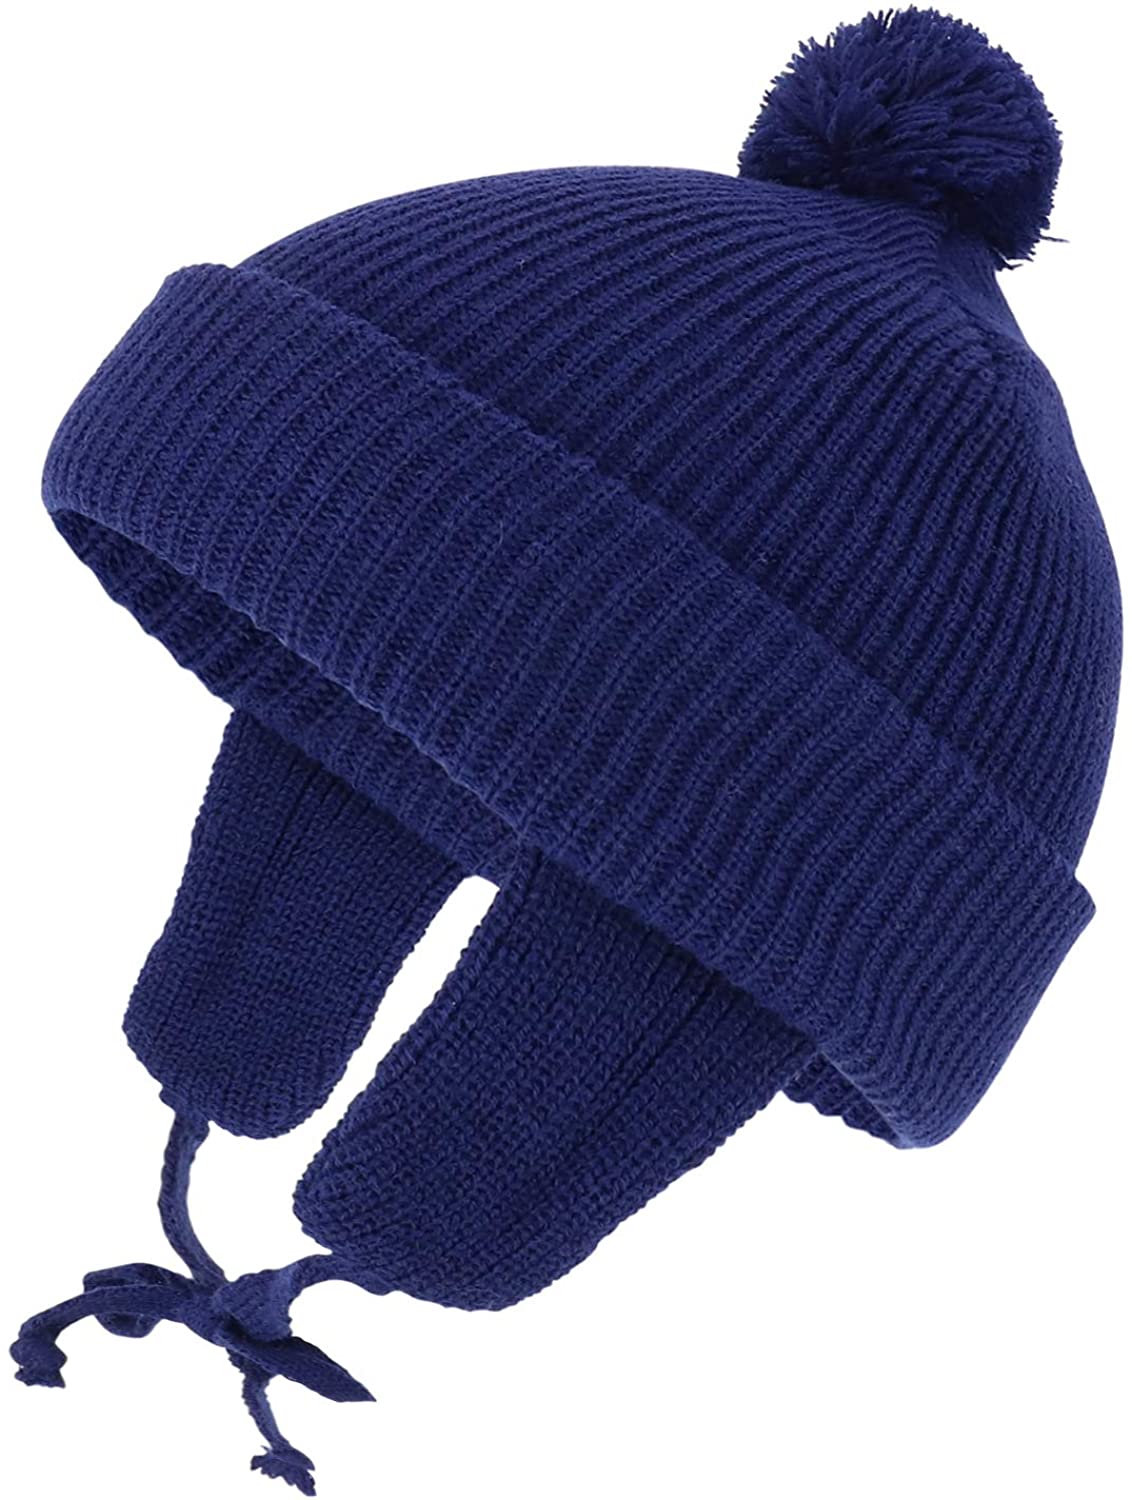 Armycrew Infant to Toddler Winter Cuff Folded Beanie with Pom and Earflaps